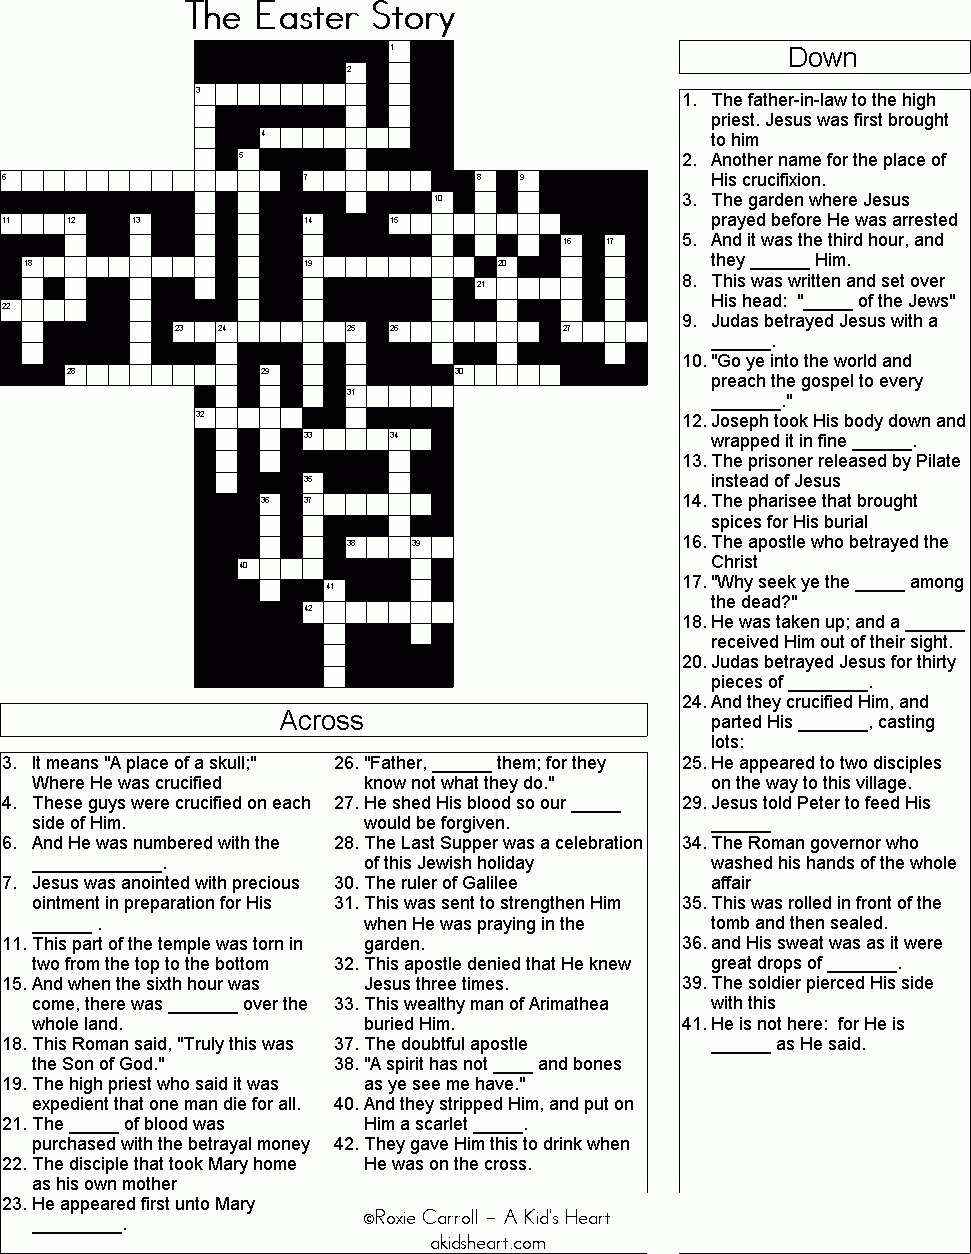 The Easter Story Crossword Puzzle | Bible Crosswords/word Search - Printable Bible Puzzles For Youth